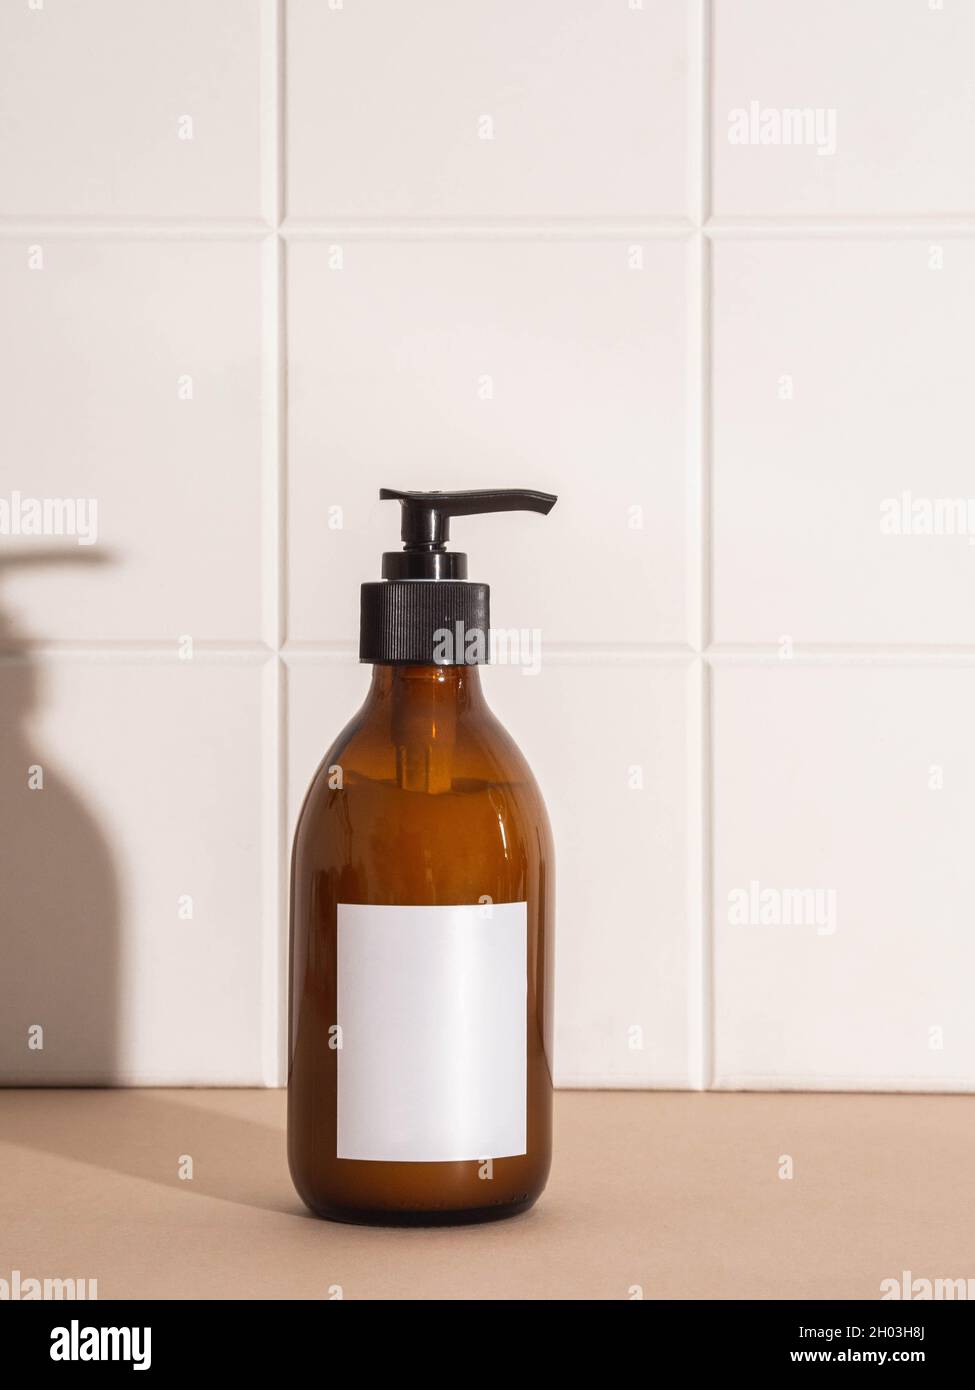 Amber bottle with white label mockup for bathing products in bathroom, spa shampoo, shower gel, liquid soap on beige table and white wall tile front v Stock Photo